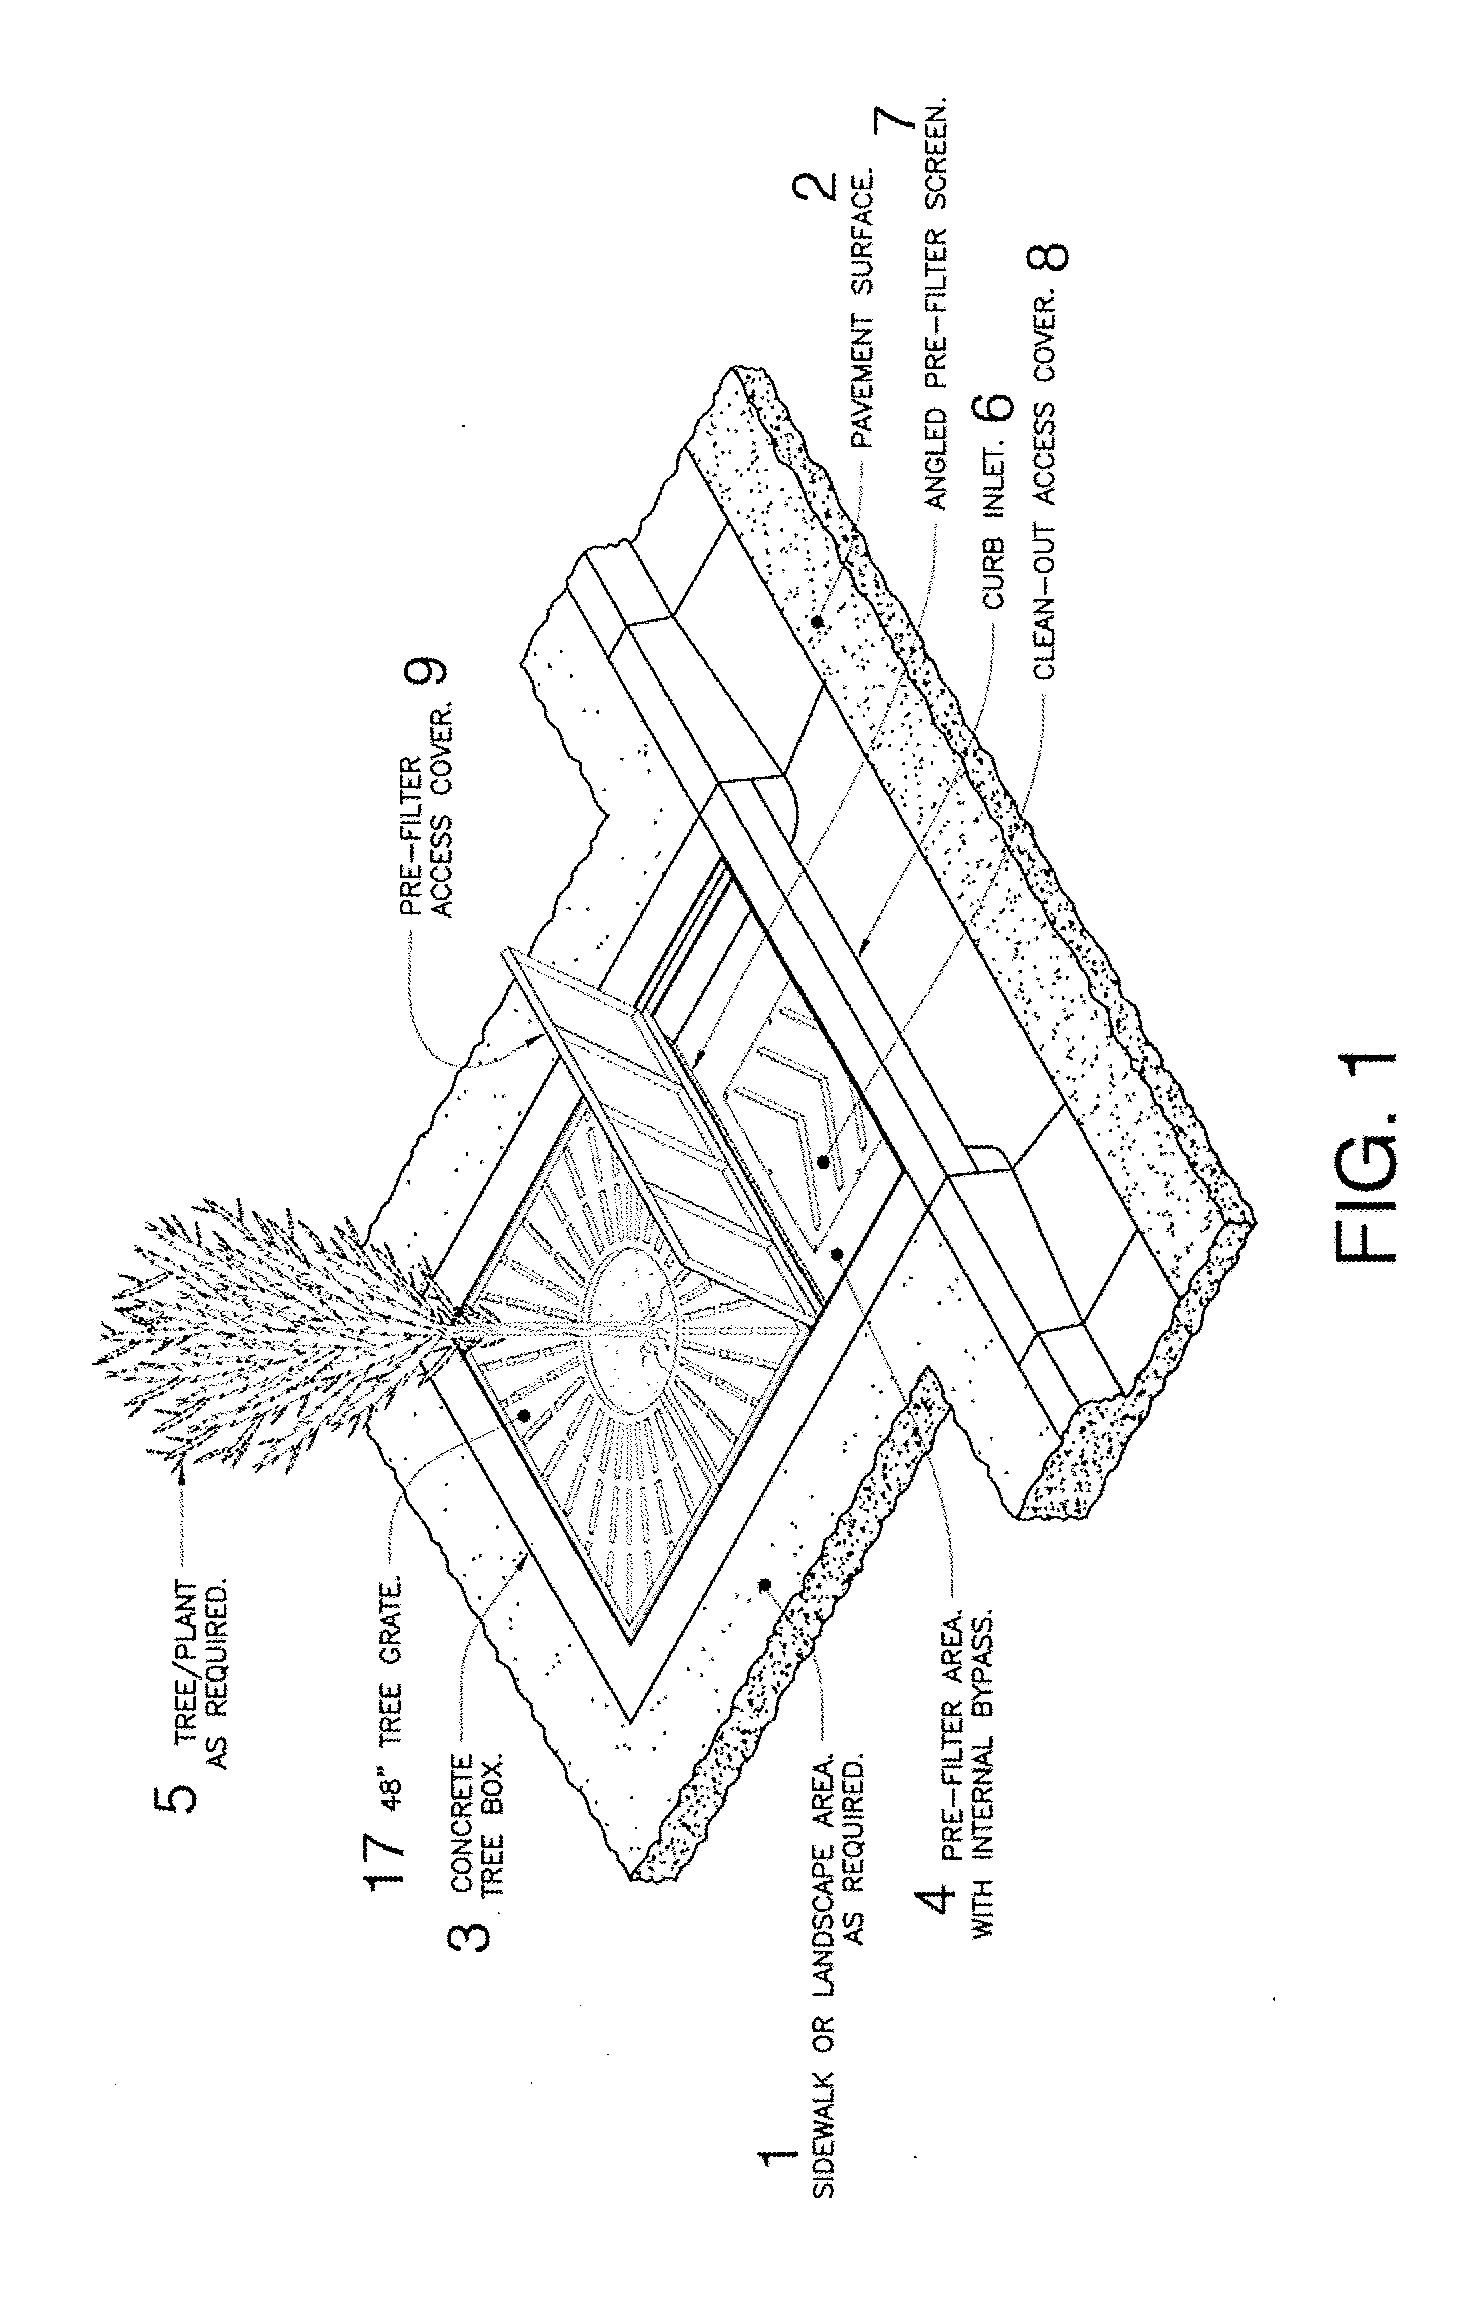 Bioretention System with Internal High Flow Bypass